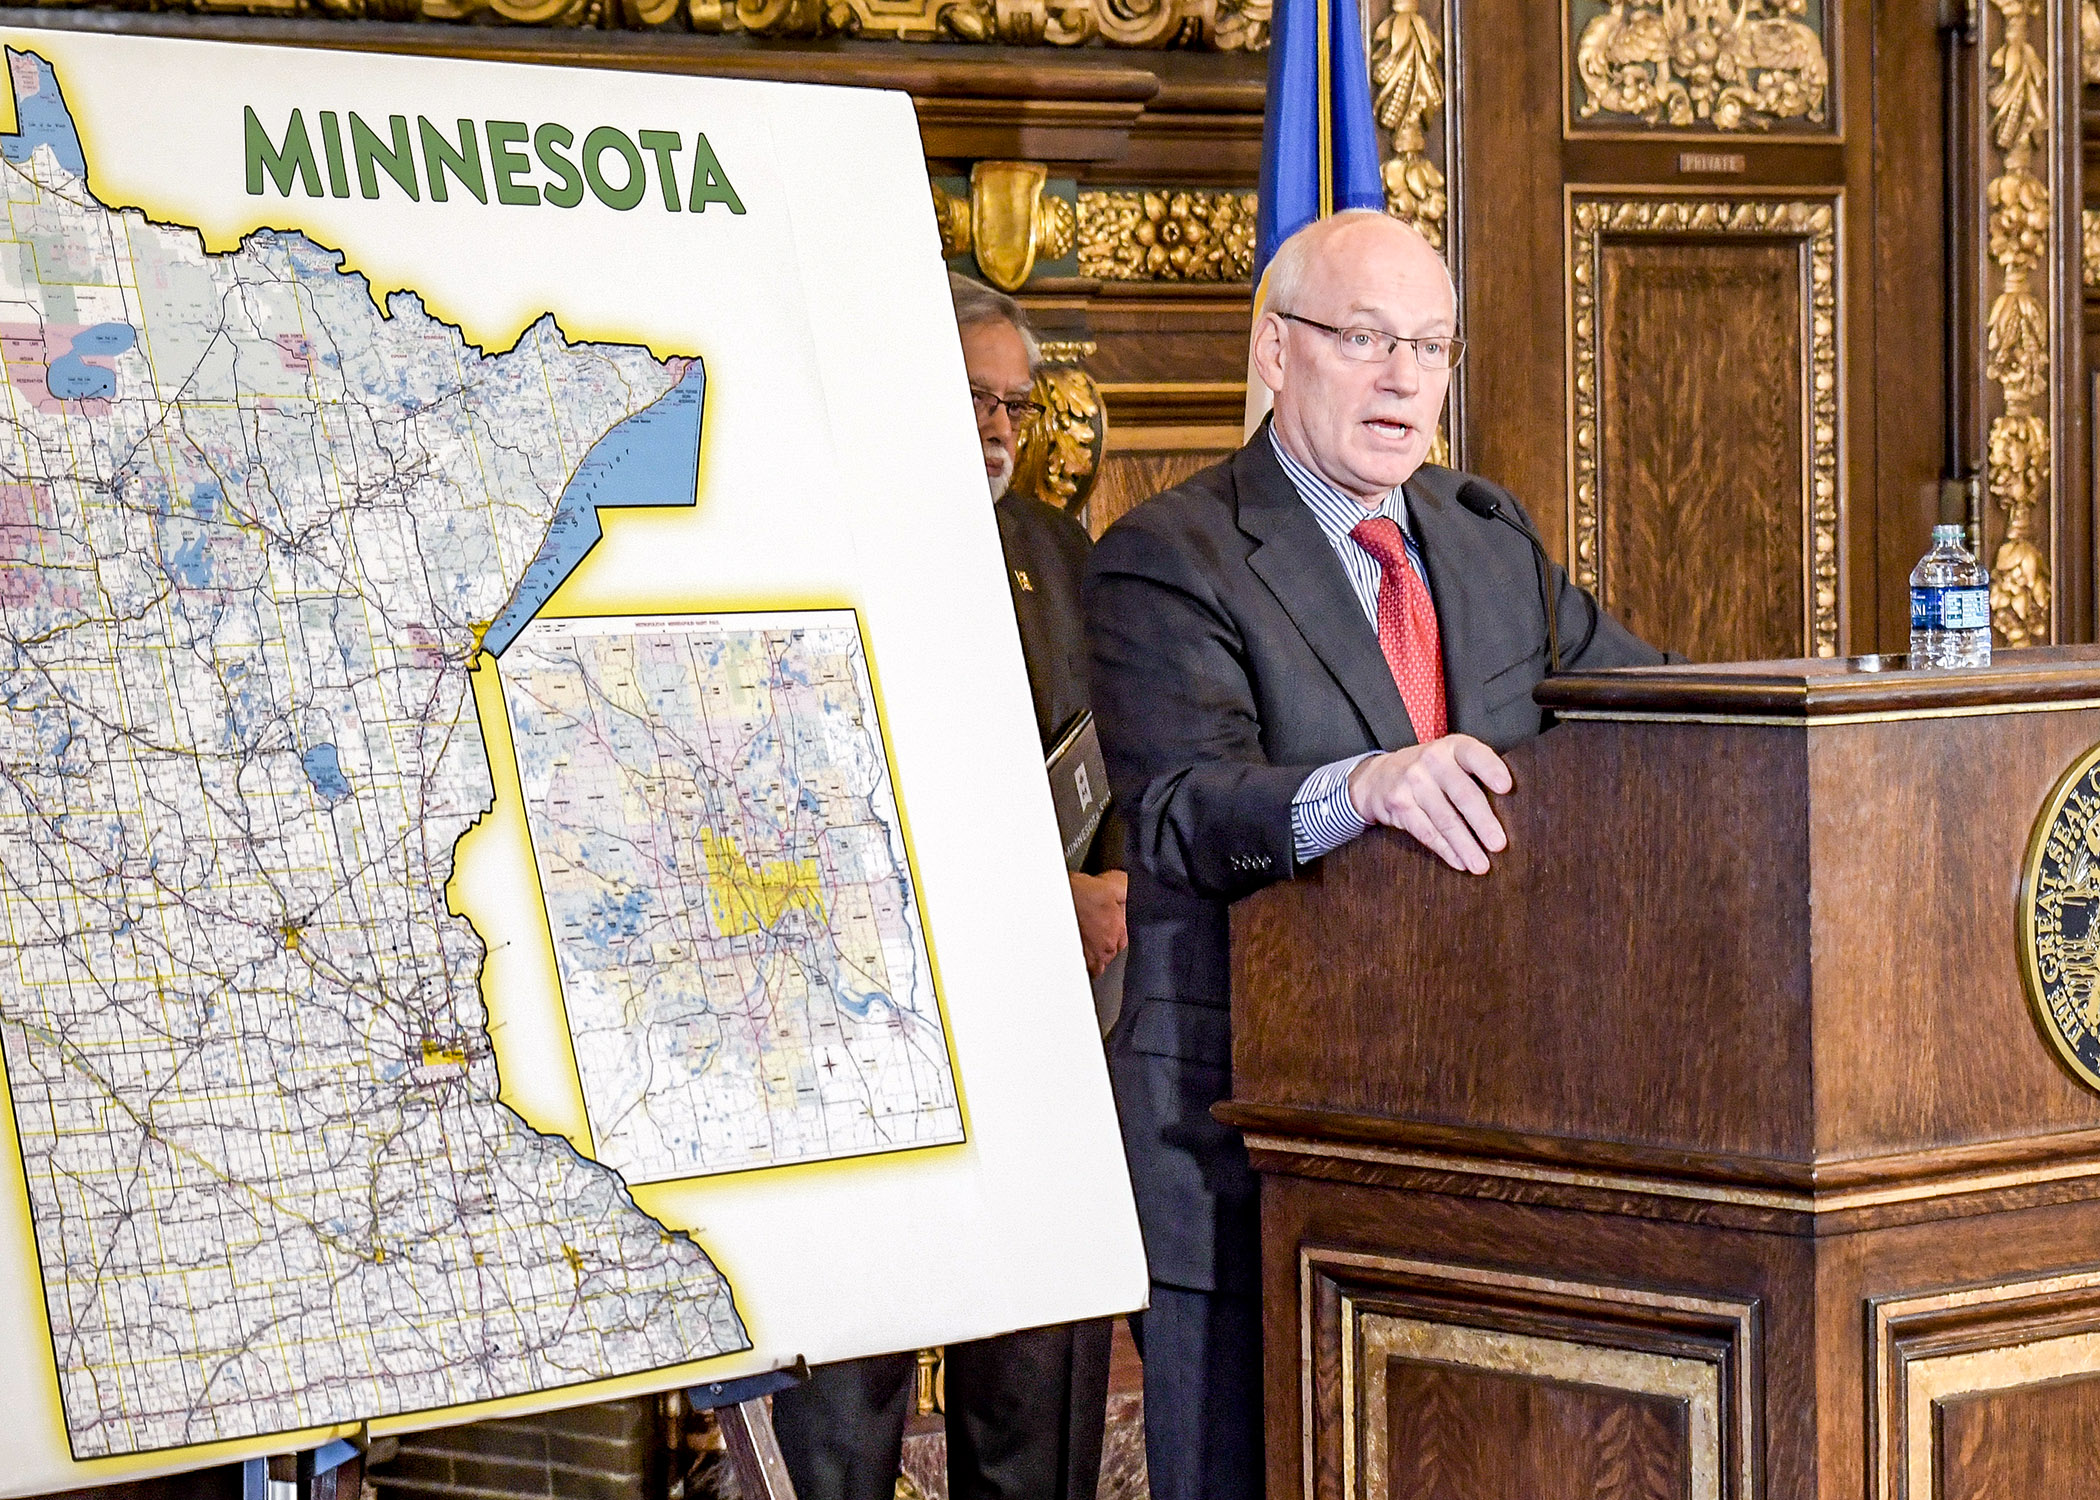 Minnesota Management and Budget Commissioner Myron Frans presents the Dayton administration’s $1.5 billion bonding proposal for the 2018 legislative session at a Tuesday news conference. Photo by Andrew VonBank